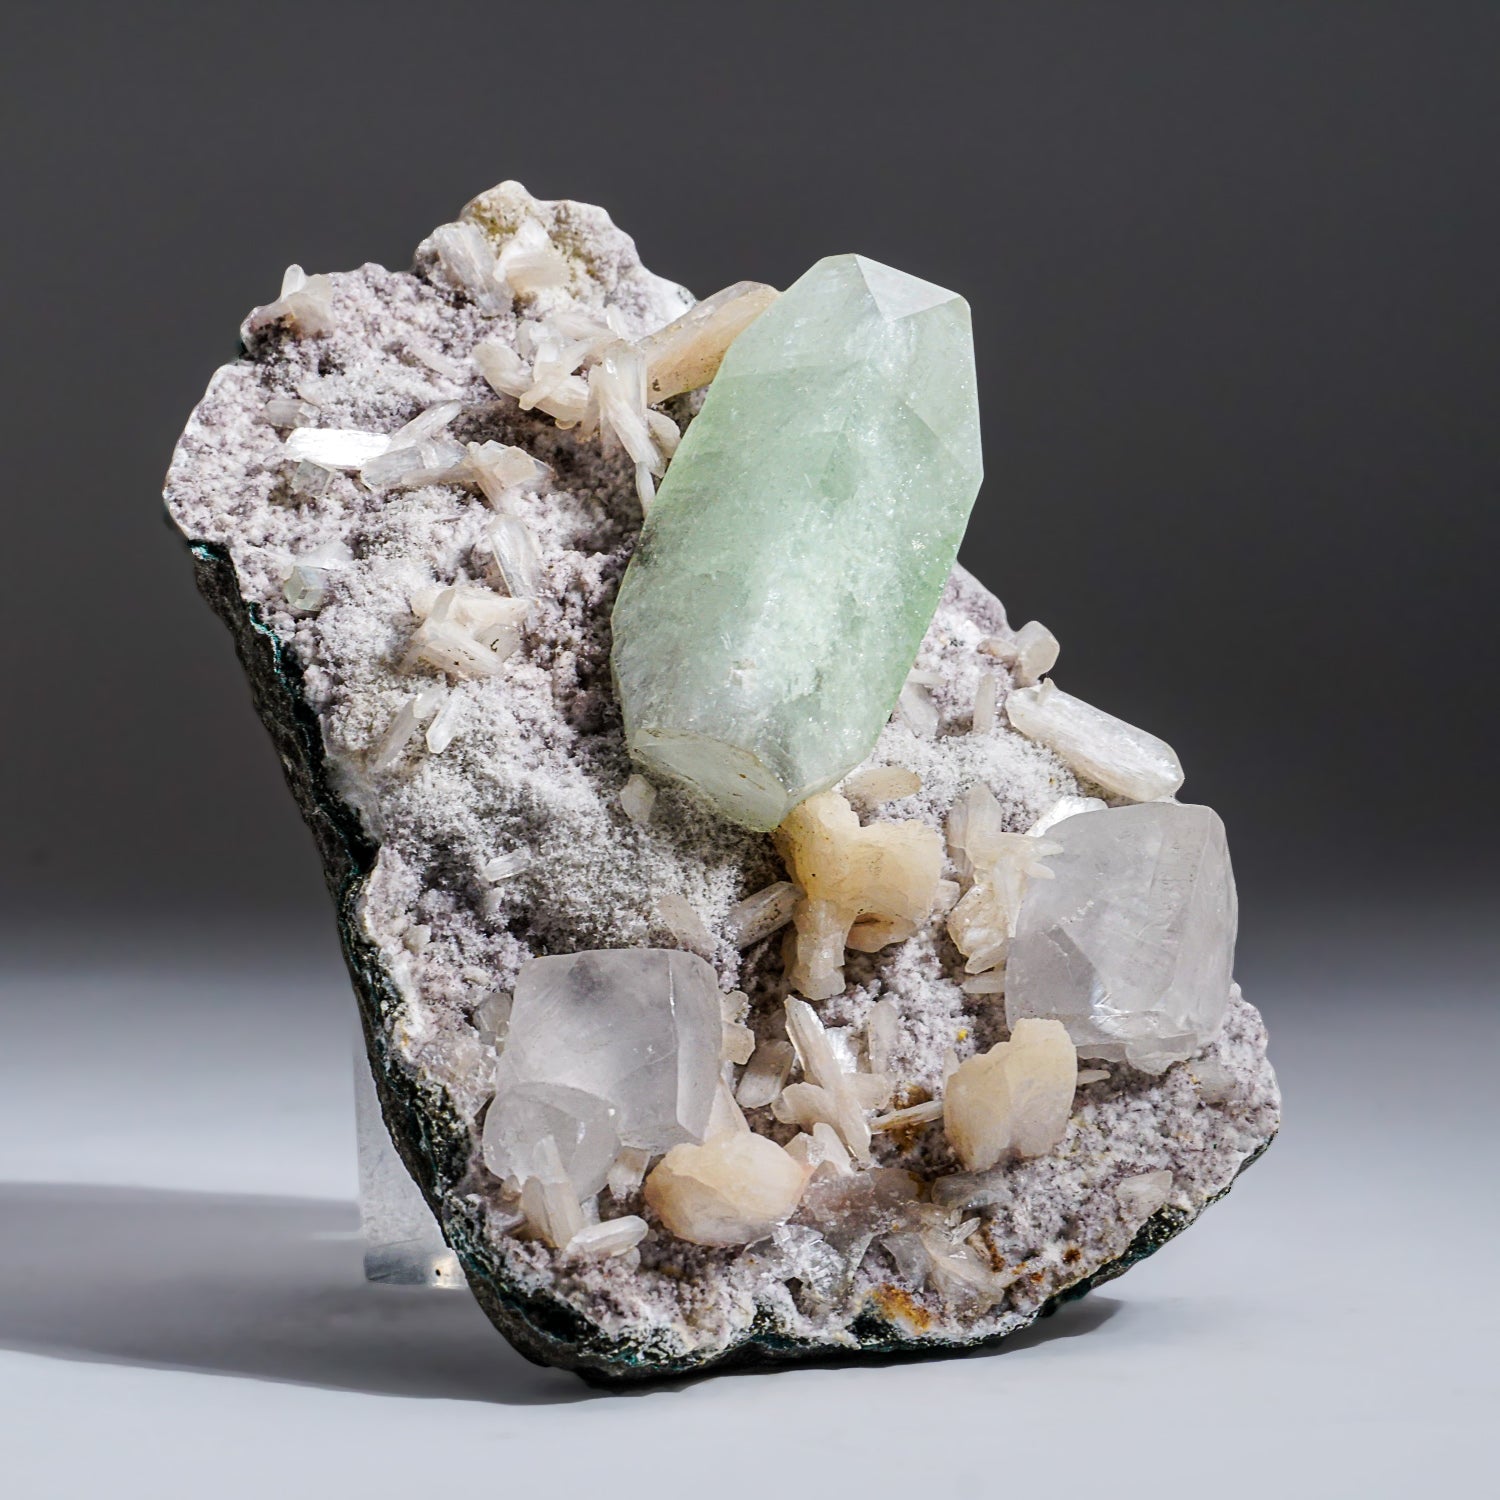 Green Apophyllite with Gem Calcite and Stilbite from Pune District, Maharashtra, India